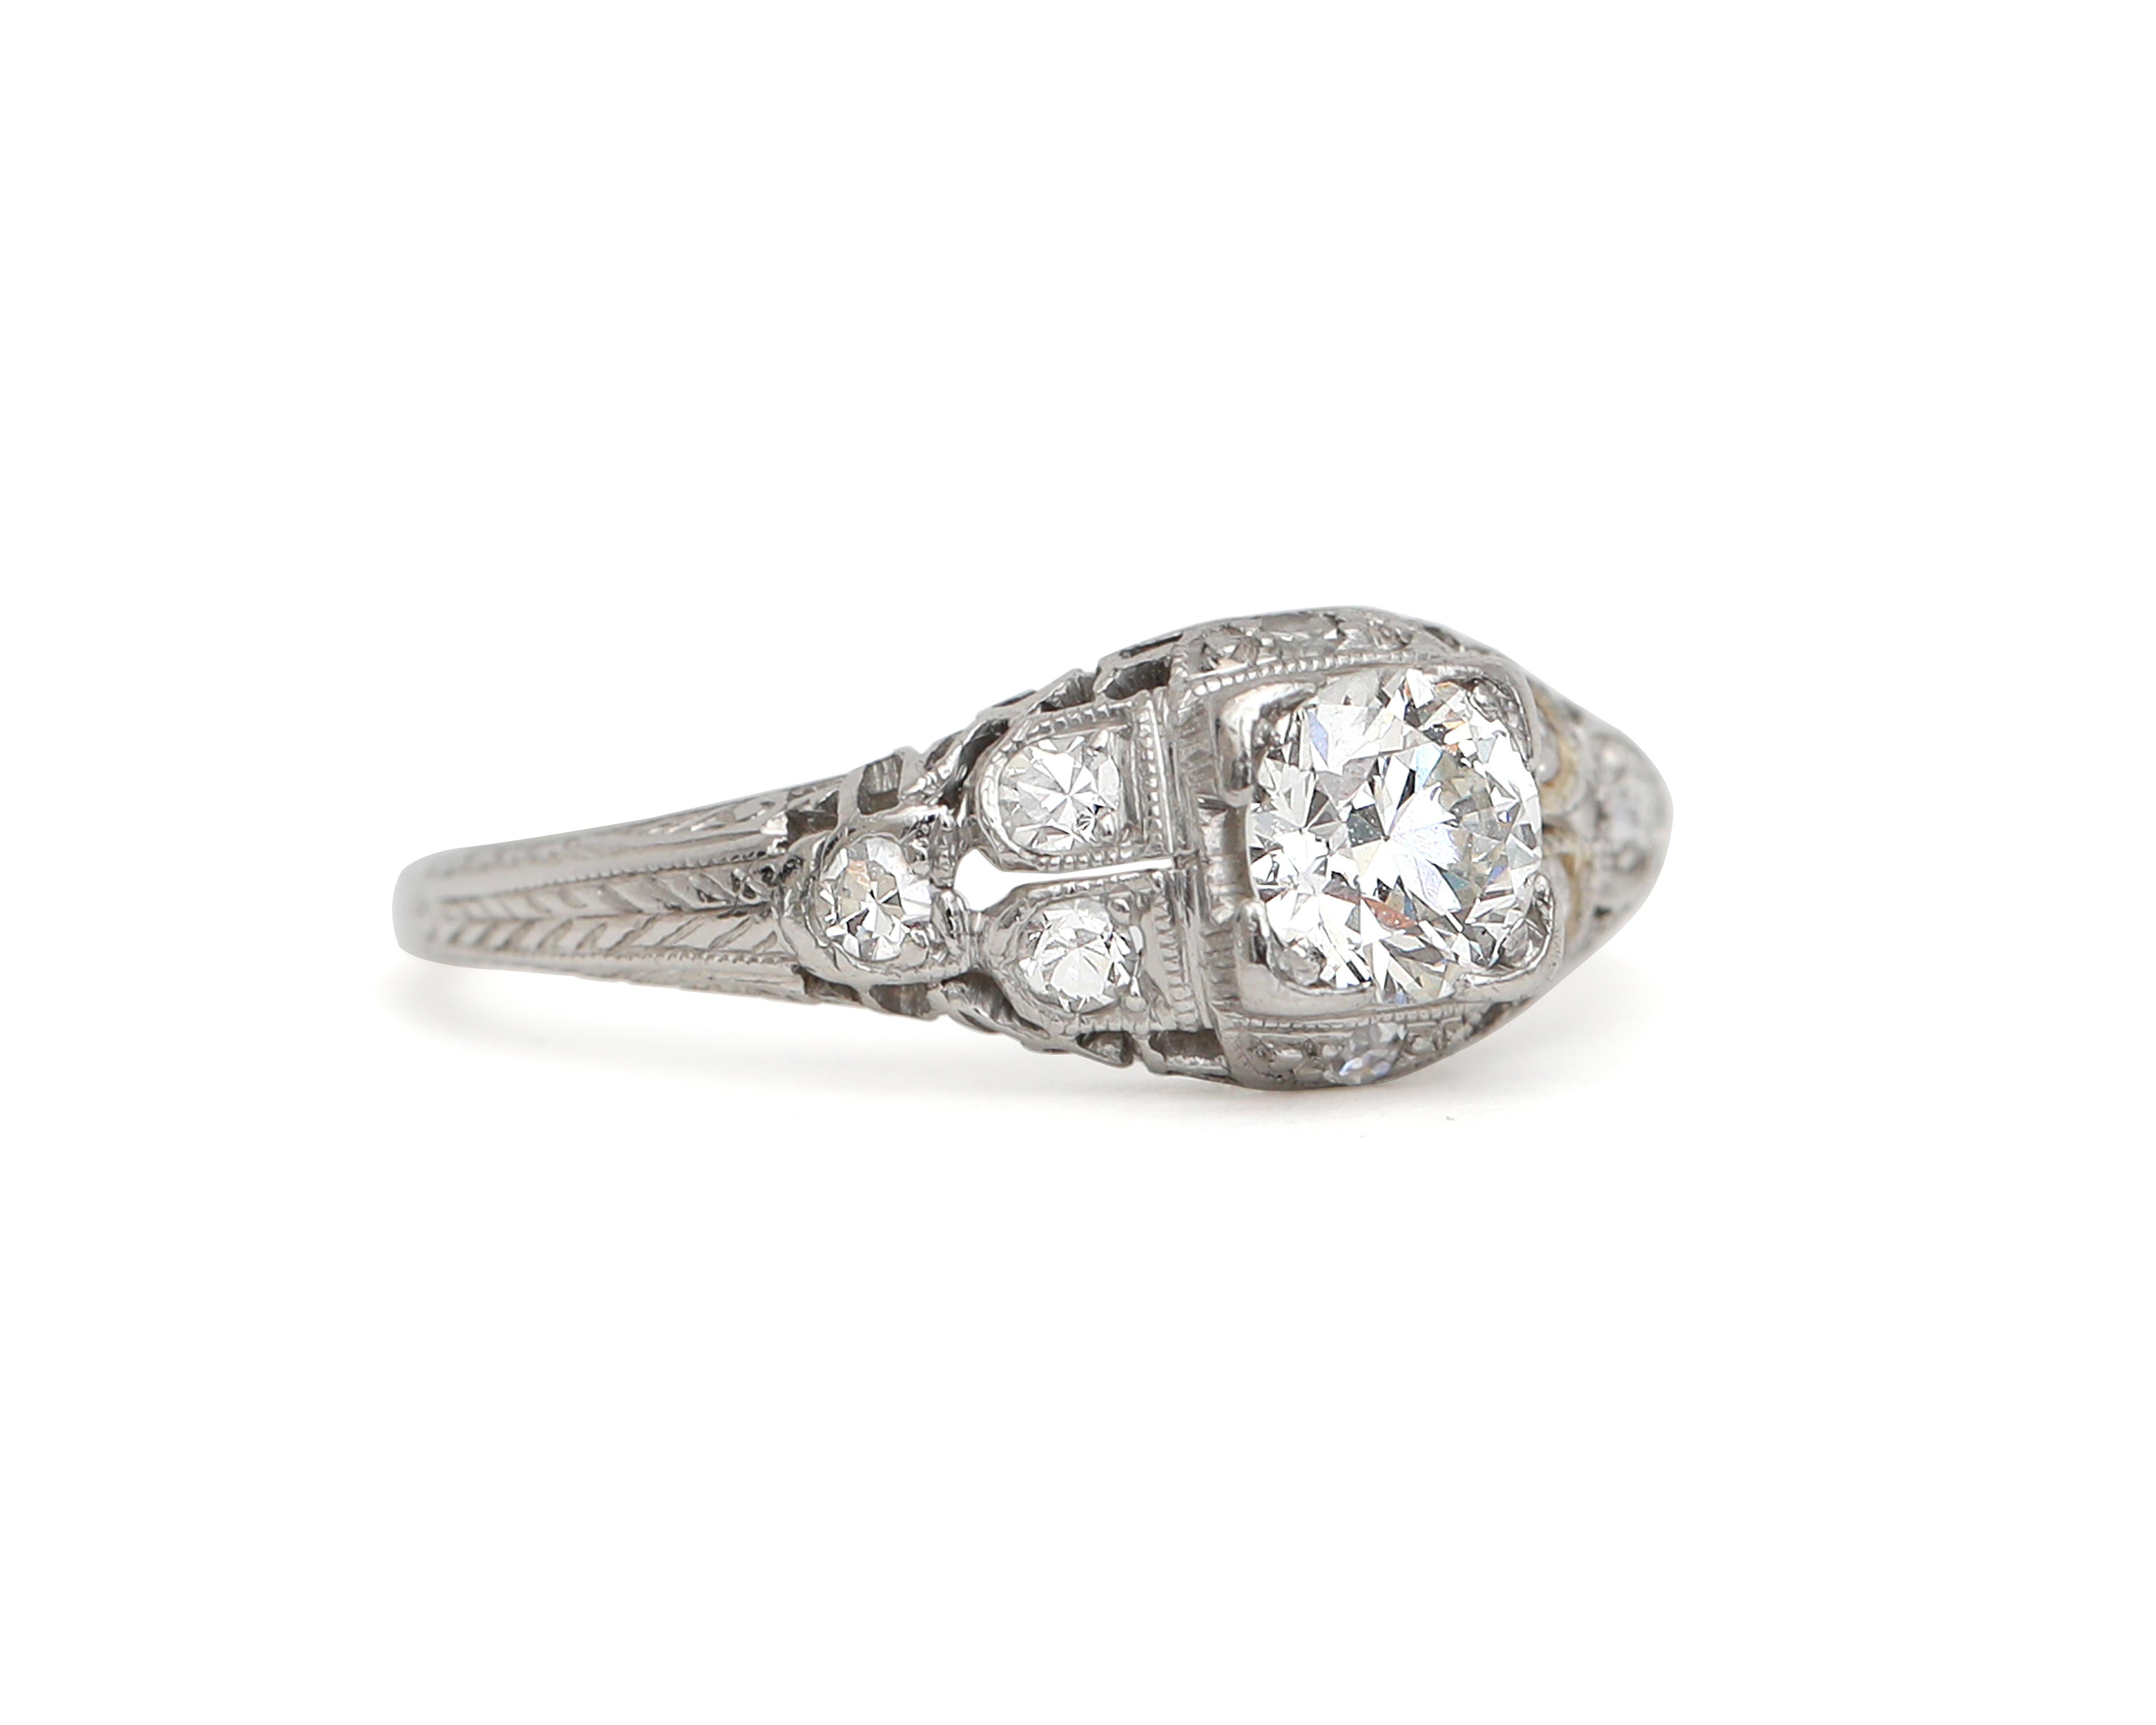 This fine example of Art Deco style is crafted in platinum with smaller diamond accents highlighting the stunning solitaire. The brilliant center diamond is approximately 0.5 carats and the accent diamonds are .6 carats. This combination is very